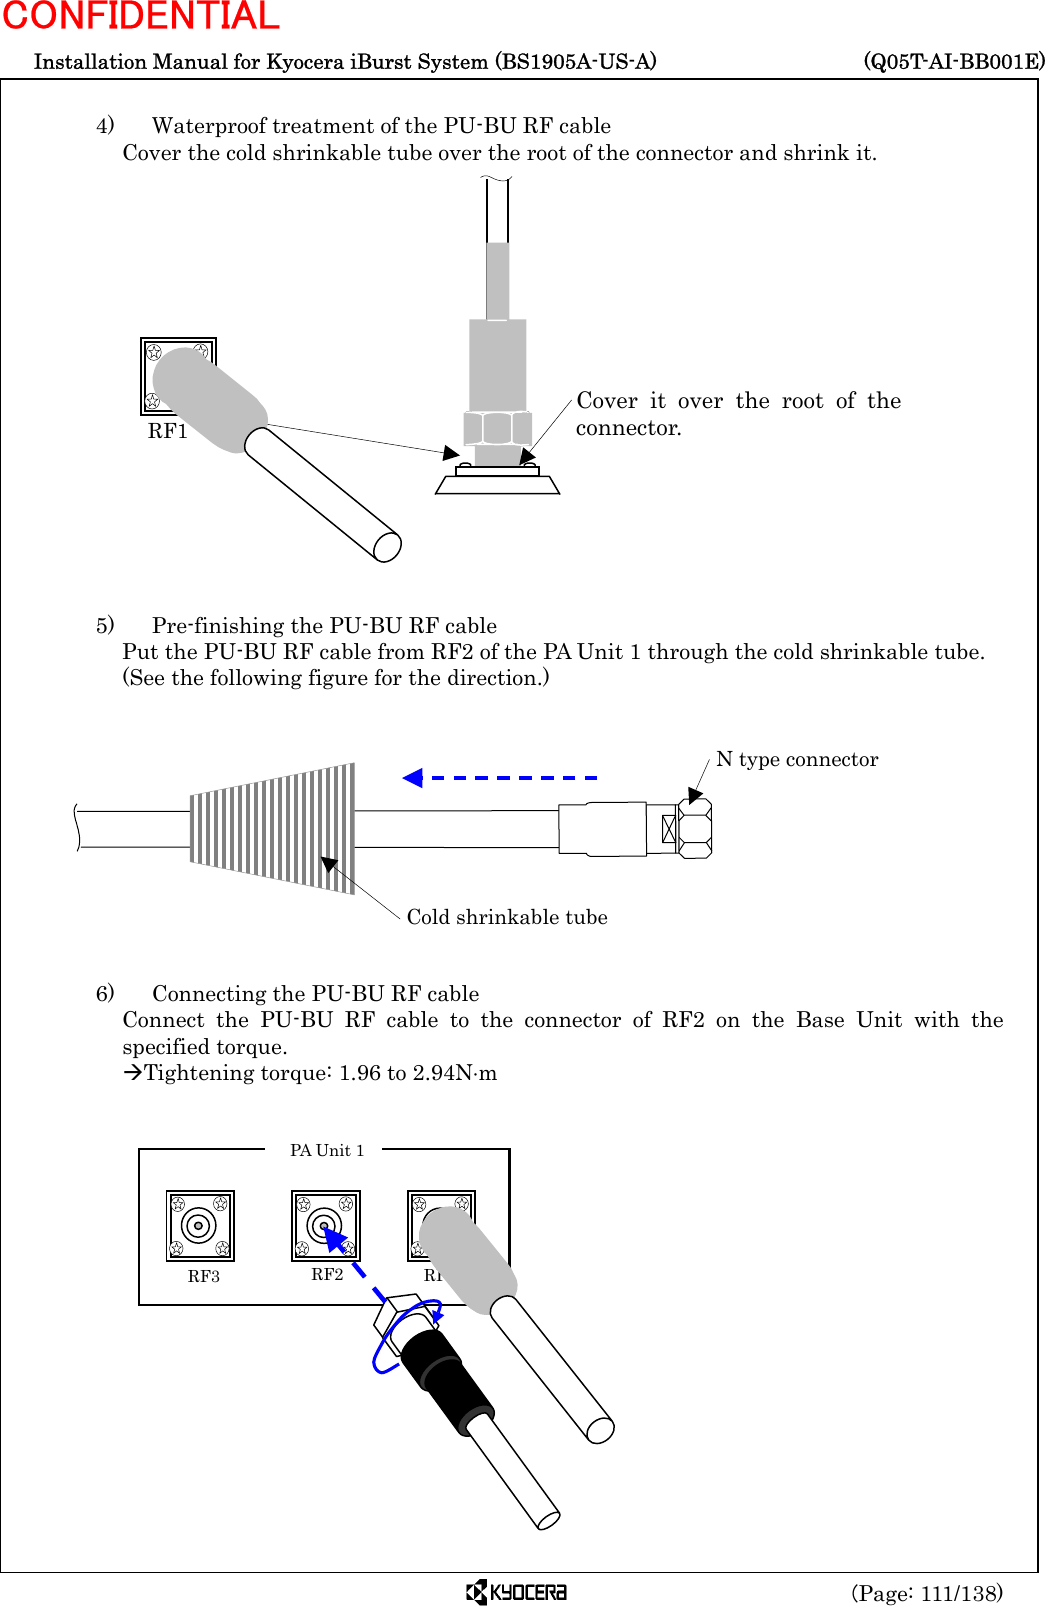  Installation Manual for Kyocera iBurst System (BS1905A-US-A)     (Q05T-AI-BB001E) (Page: 111/138) CONFIDENTIAL  4)    Waterproof treatment of the PU-BU RF cable Cover the cold shrinkable tube over the root of the connector and shrink it.                  5)    Pre-finishing the PU-BU RF cable Put the PU-BU RF cable from RF2 of the PA Unit 1 through the cold shrinkable tube.   (See the following figure for the direction.)            6)    Connecting the PU-BU RF cable Connect the PU-BU RF cable to the connector of RF2 on the Base Unit with the specified torque. ÆTightening torque: 1.96 to 2.94N⋅m              RF1 Cover it over the root of theconnector.  Cold shrinkable tube N type connector  RF3    RF2 RF1 PA Unit 1 